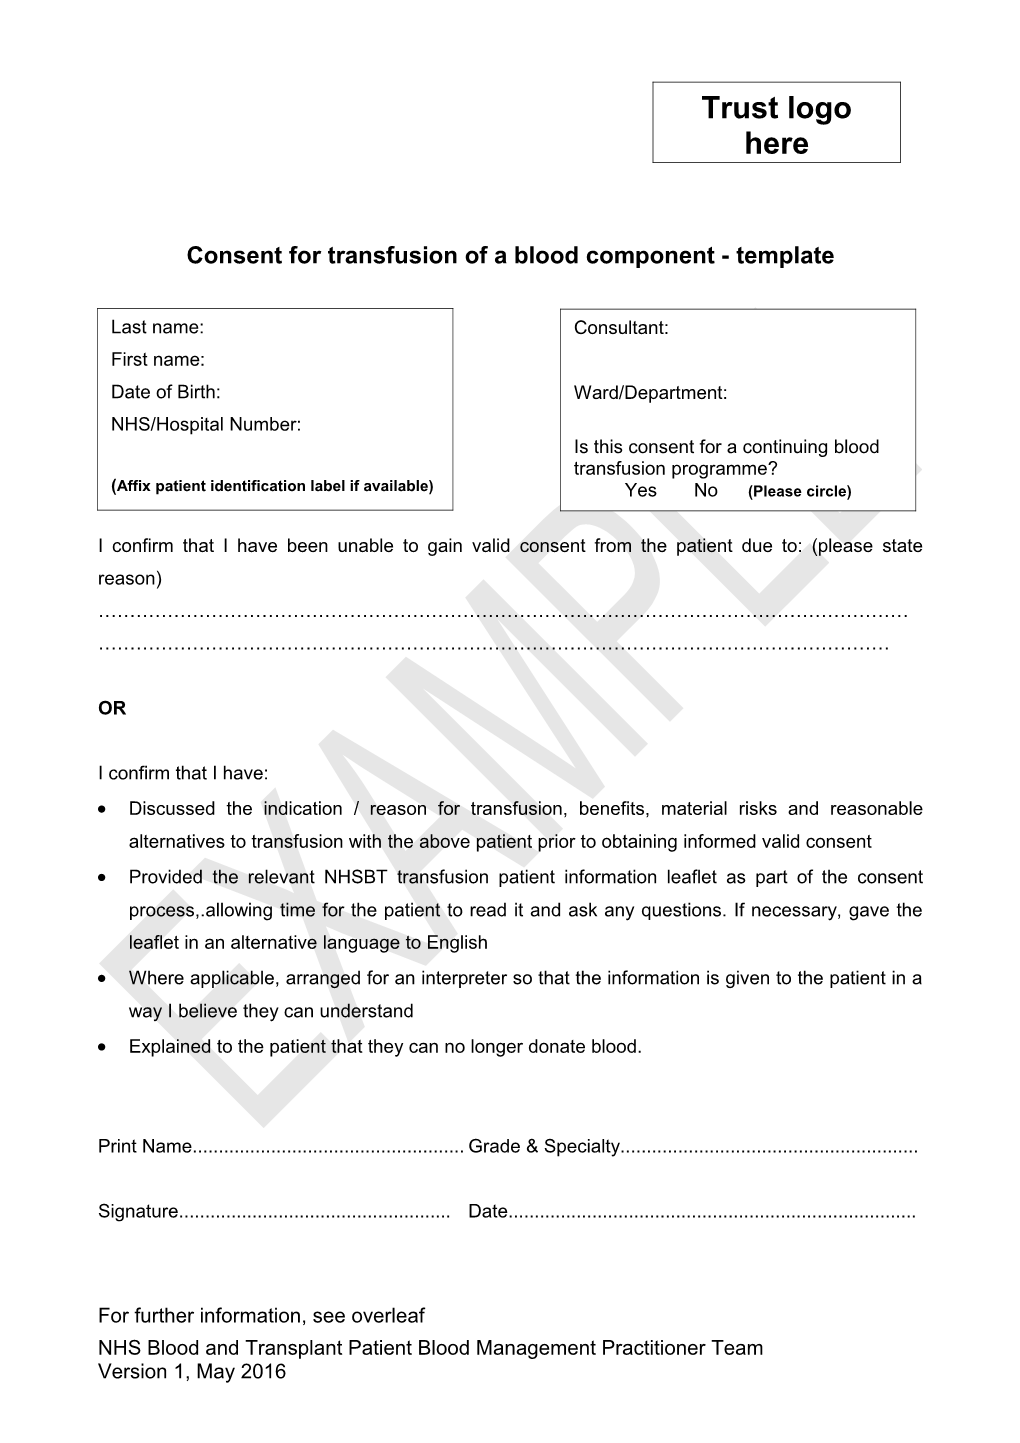 Consent for Transfusion of a Blood Component - Template